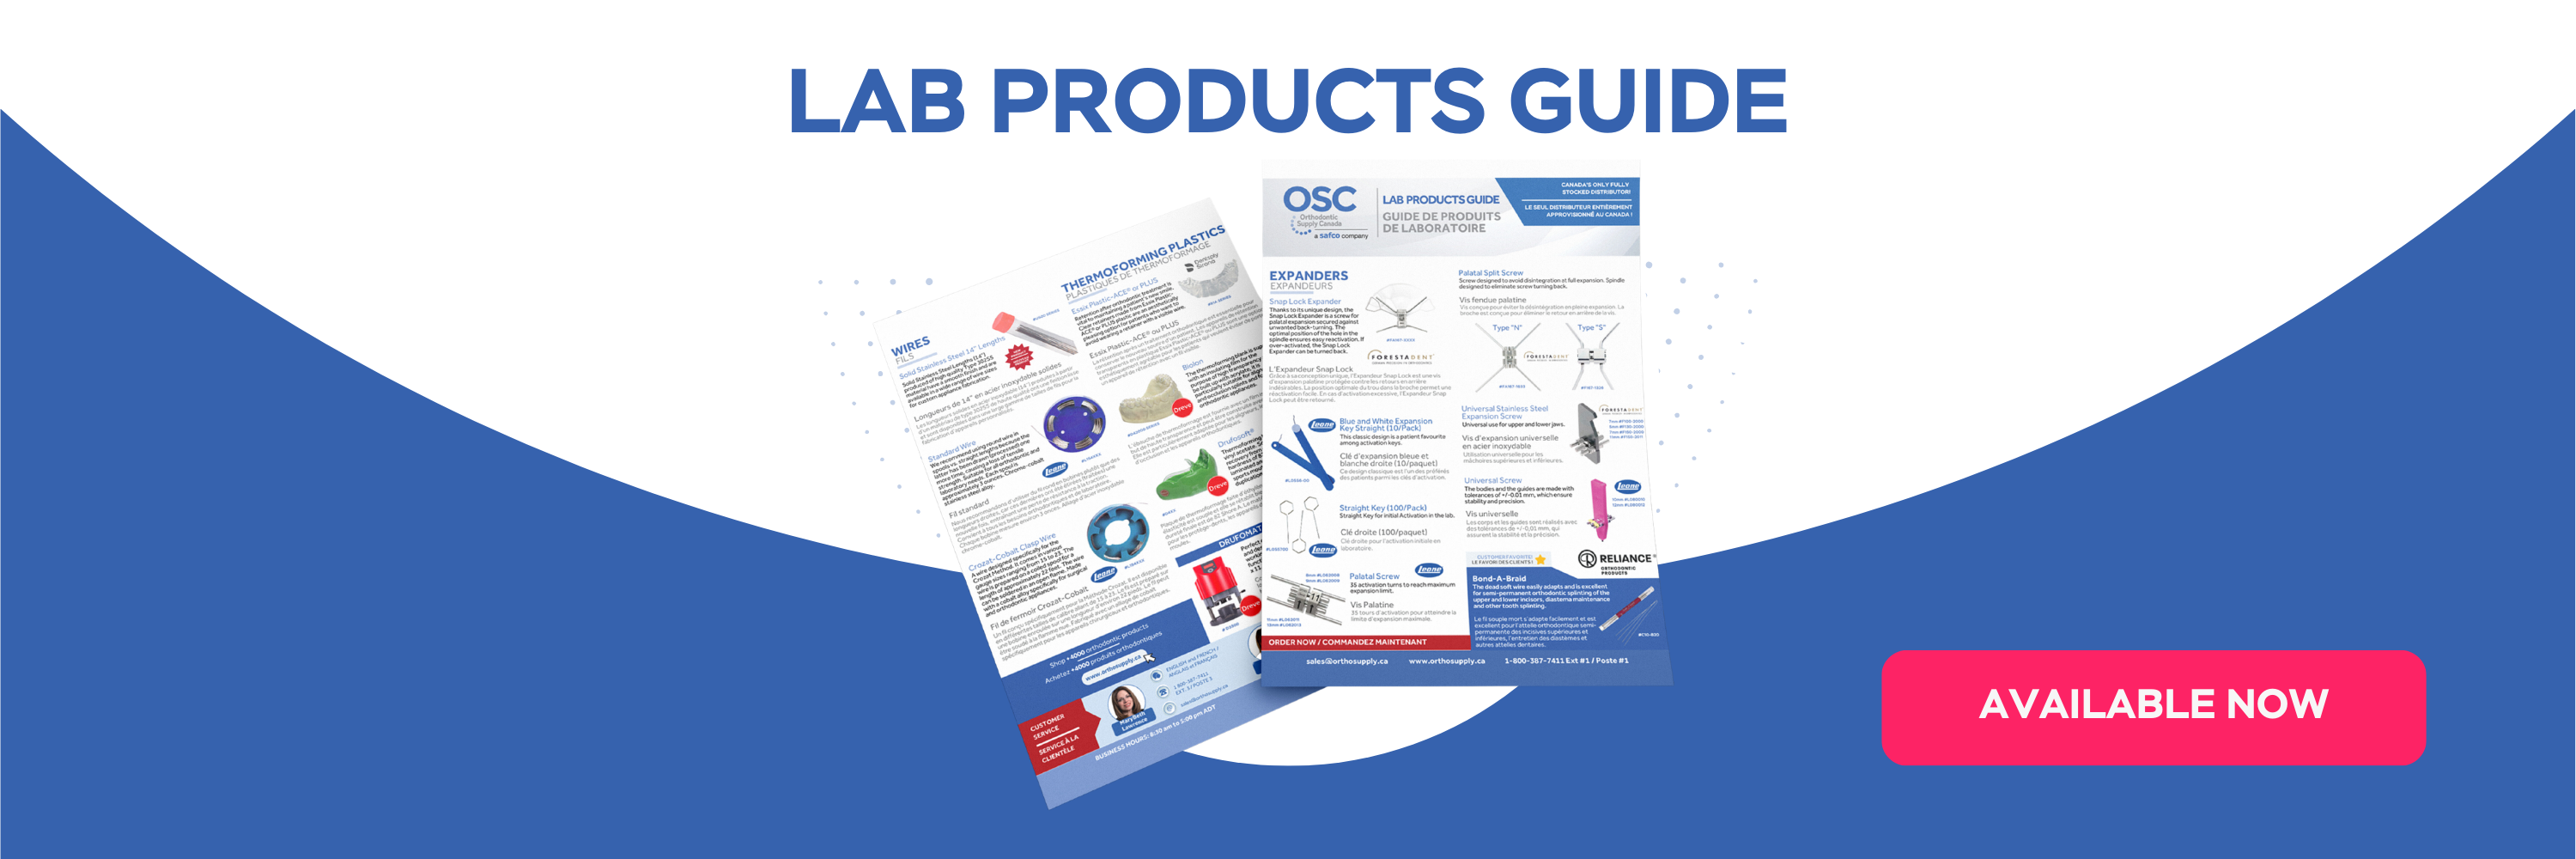 Lab Product Guide Flyer